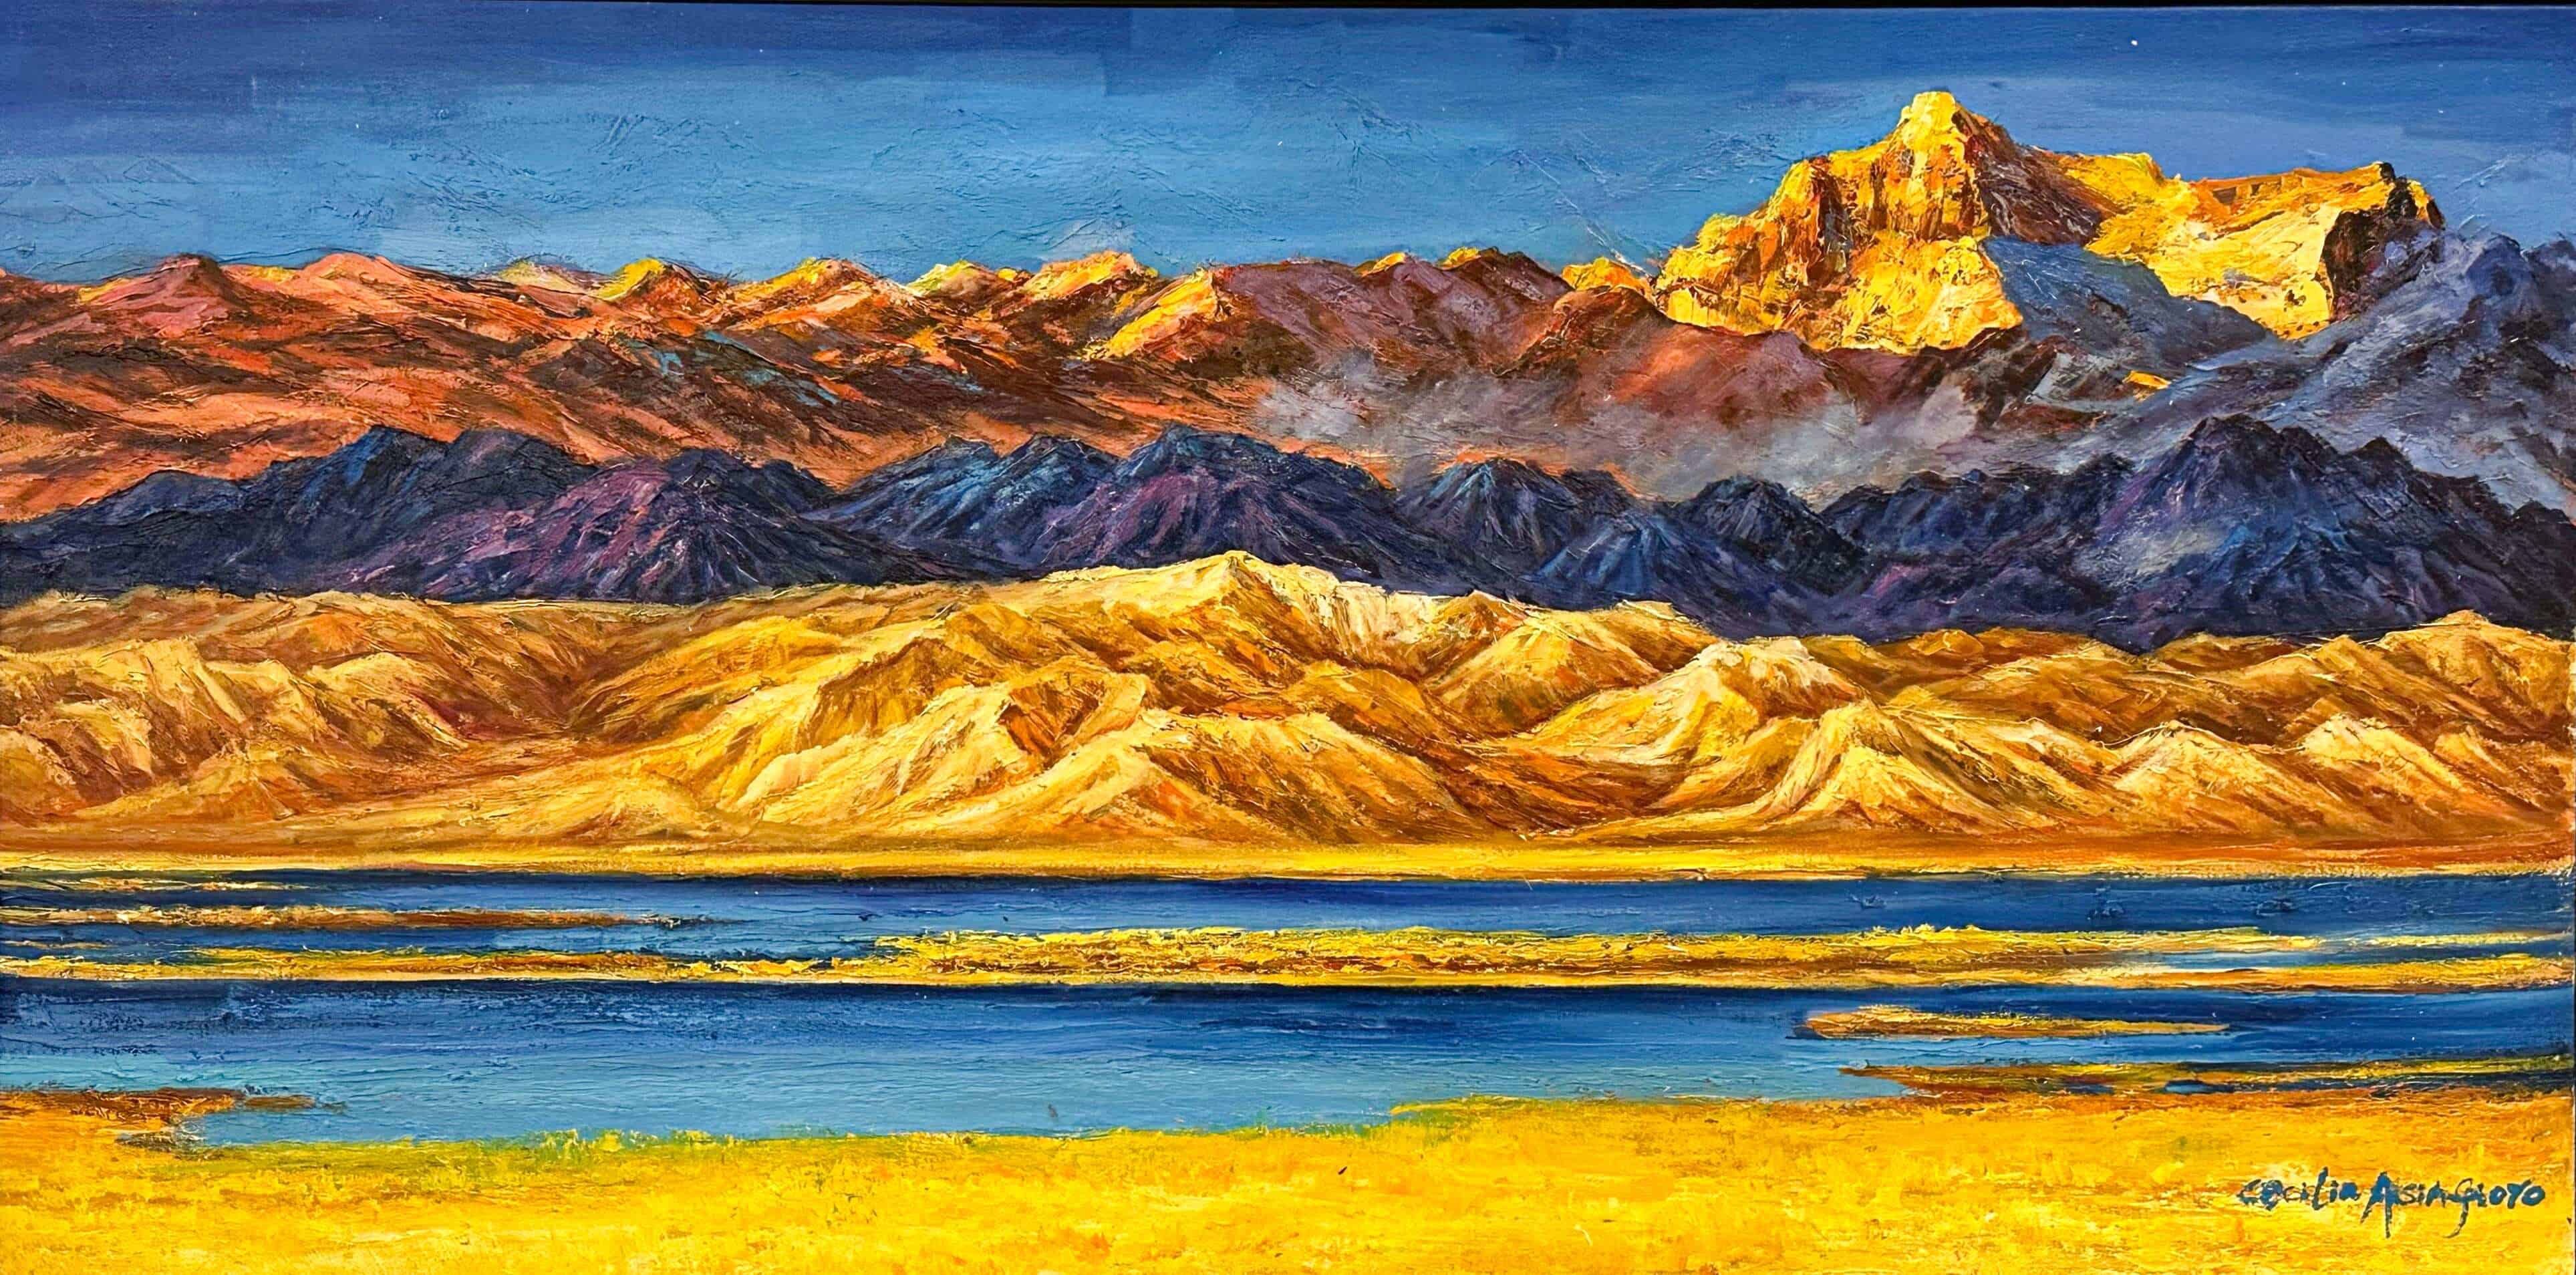 Contemporary Art. Title: Harmony of the Mountains, Oil on Canvas, 27 x 54 in by Canadian Artist Cecilia Aisin-Gioro.